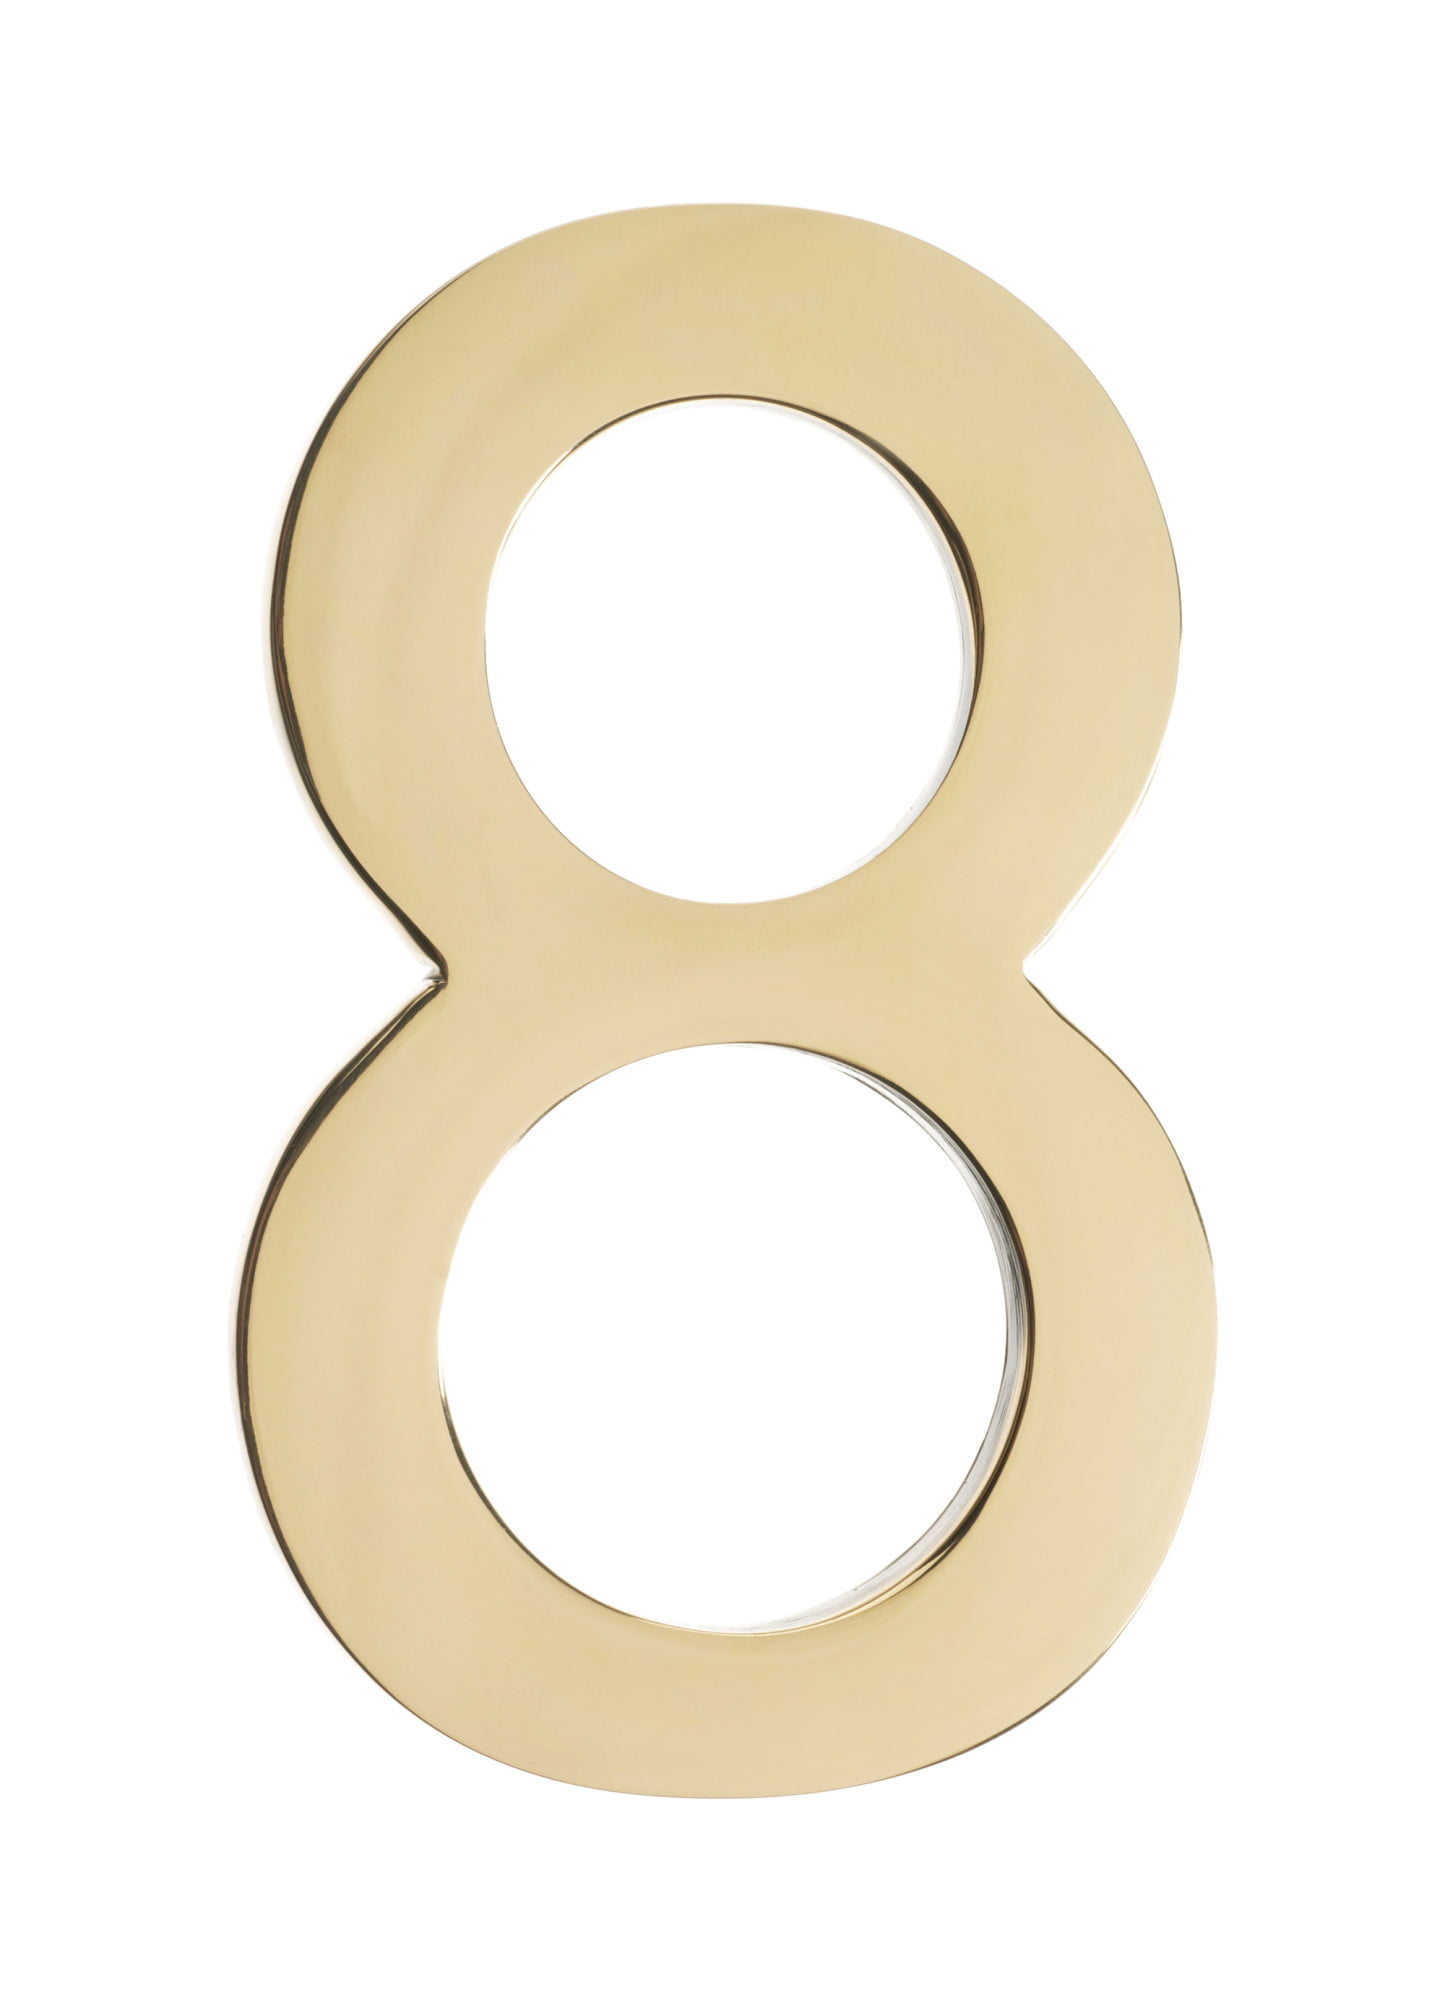 3582pb-8 Floating House Number 8, Polished Brass - 4 In.